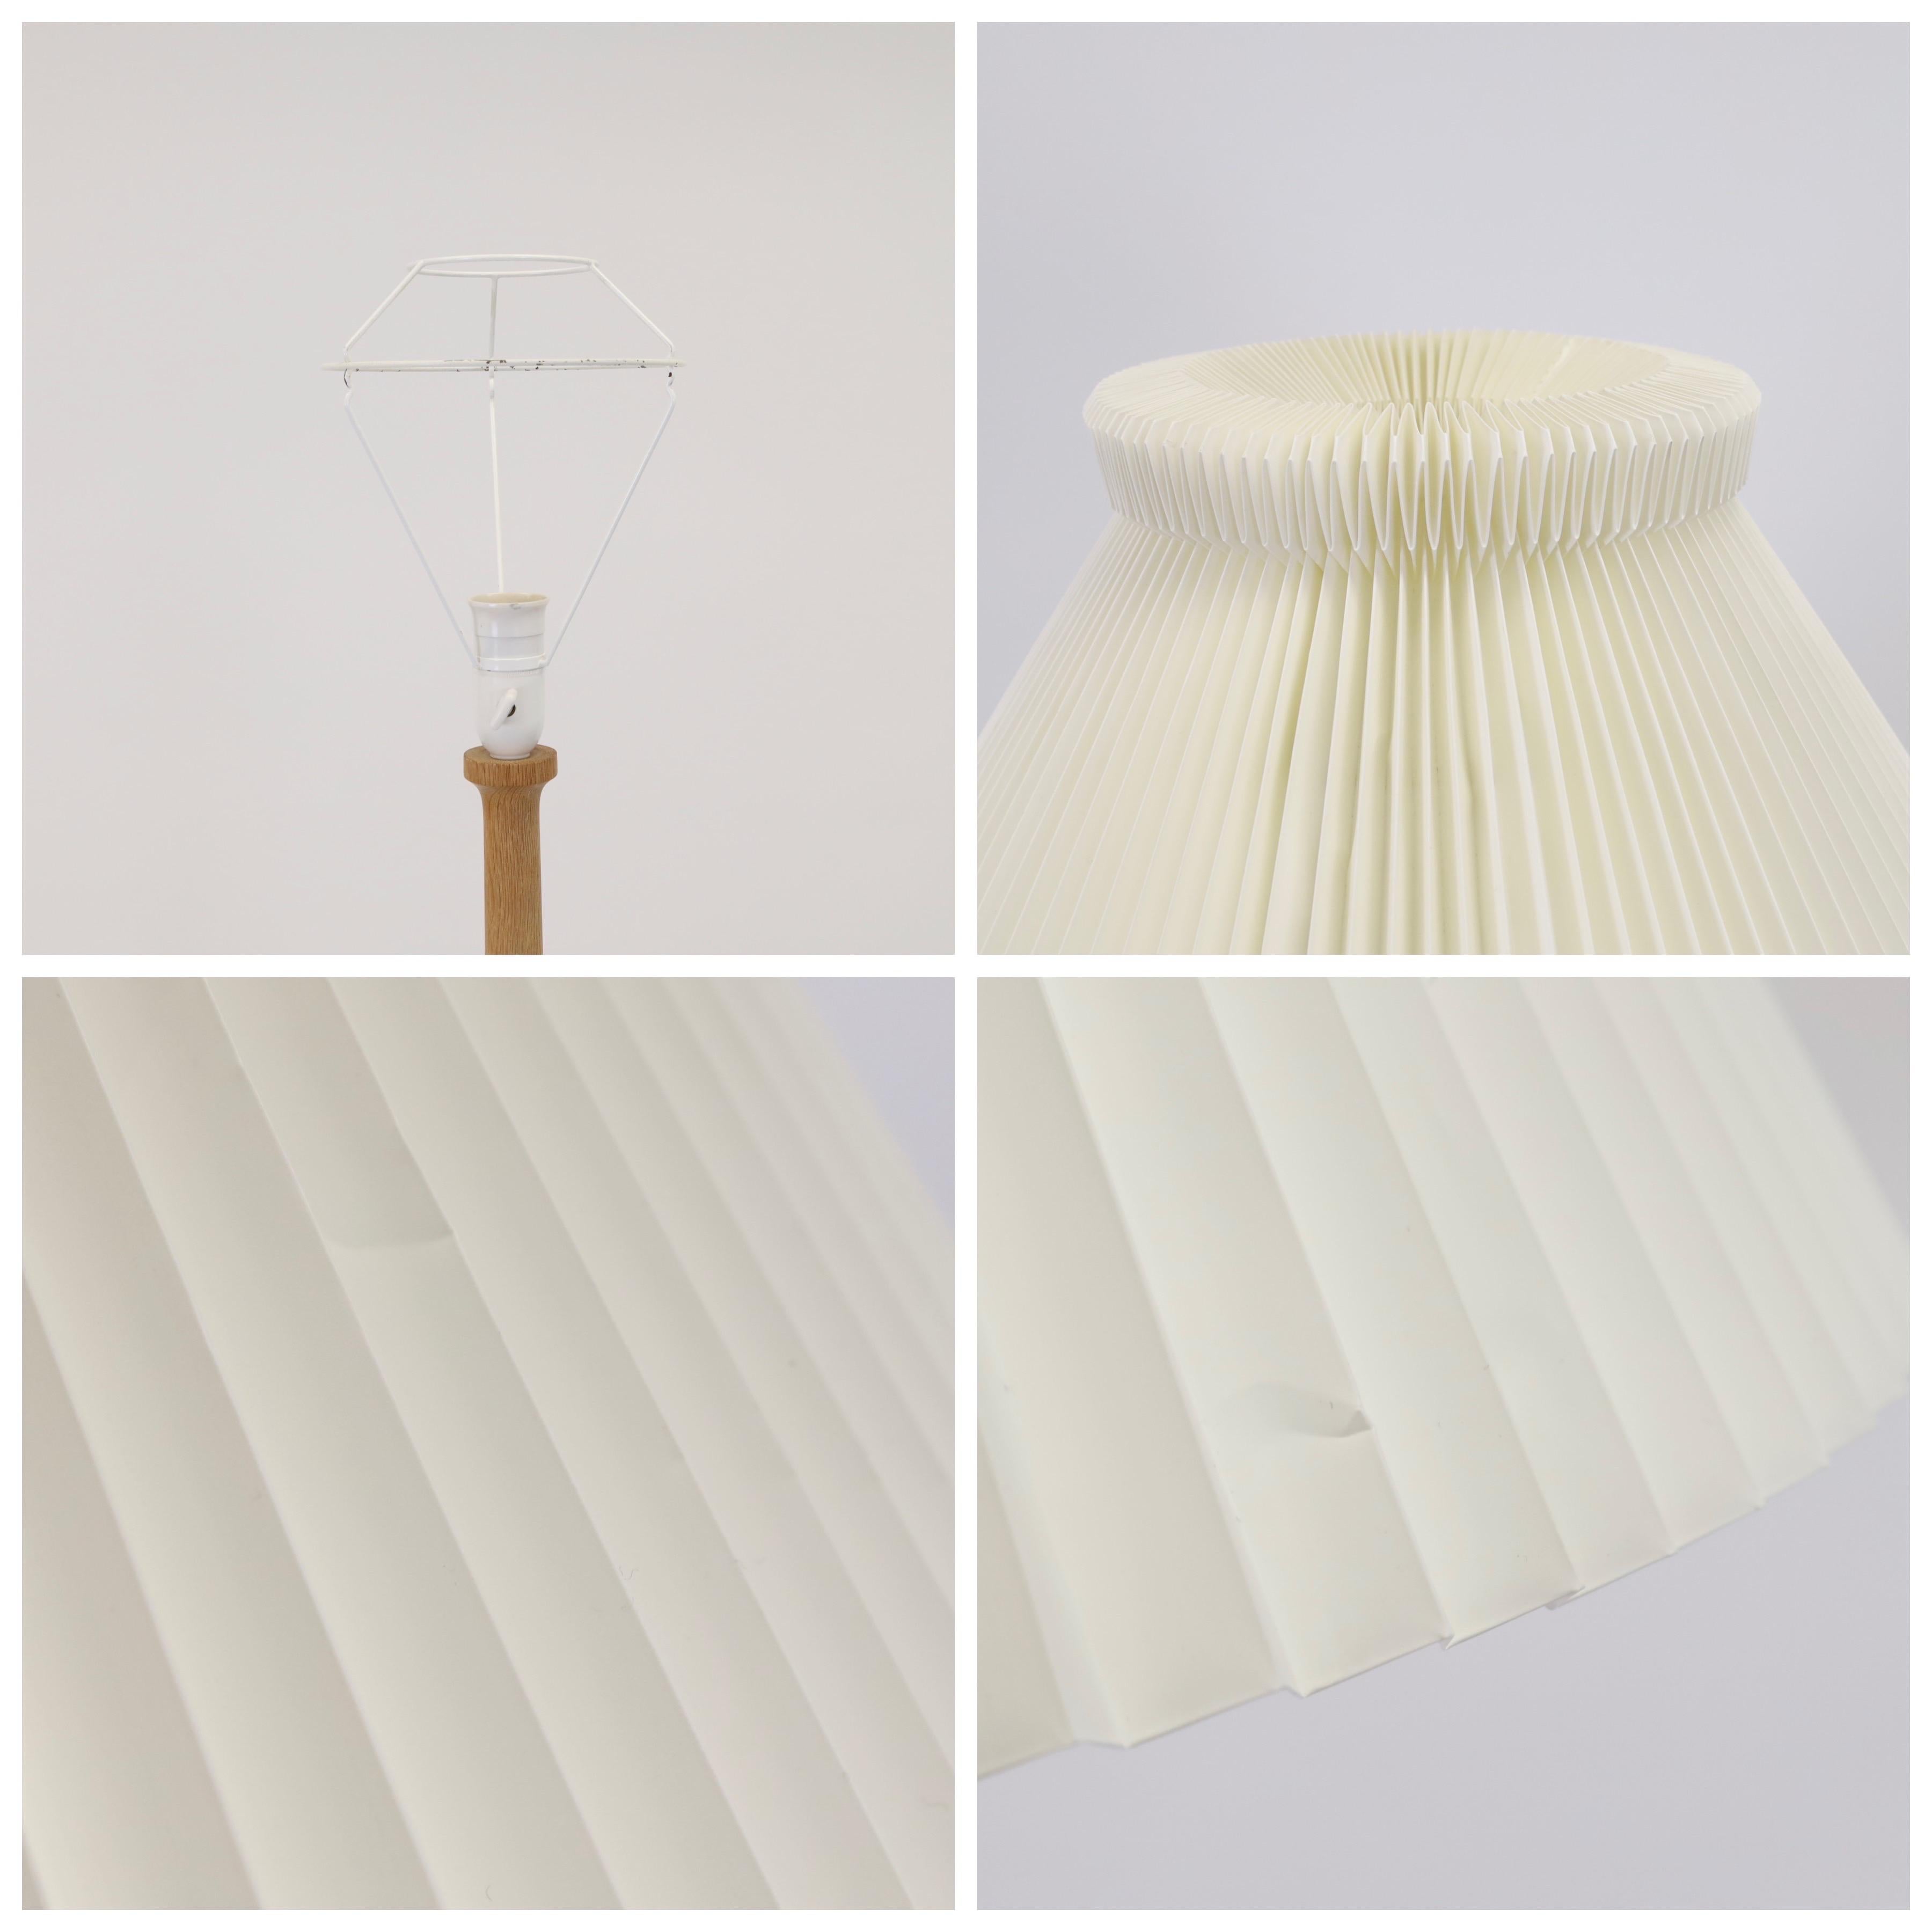 Oak wood floor lamp designed by Lisbeth Brams for Brdr. Krüger in the 1960s with a shade by Le Klint. A modern piece by the Danish designer and example of her extraordinary ability to make timeless lamps. 

* An oak wood floor lamp with a white